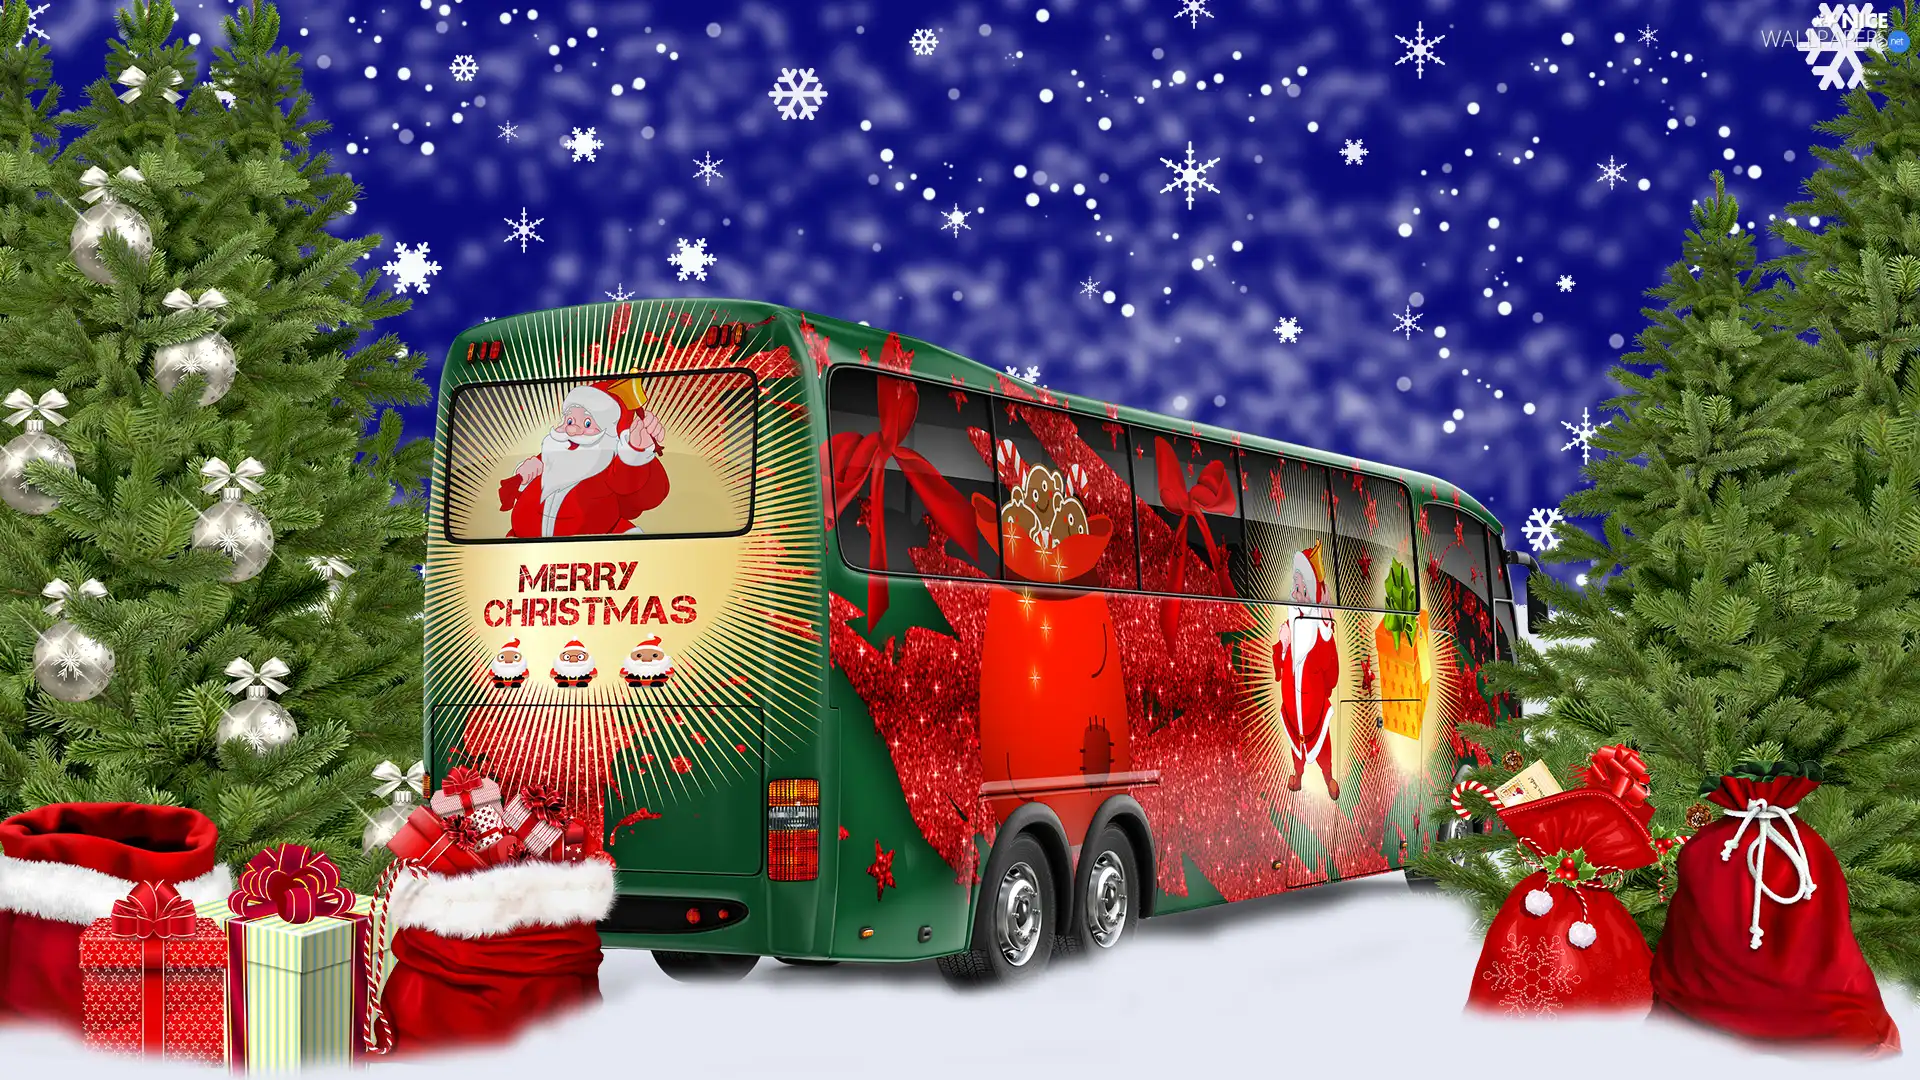 viewes, bus, gifts, trees, festive, christmas tree, graphics